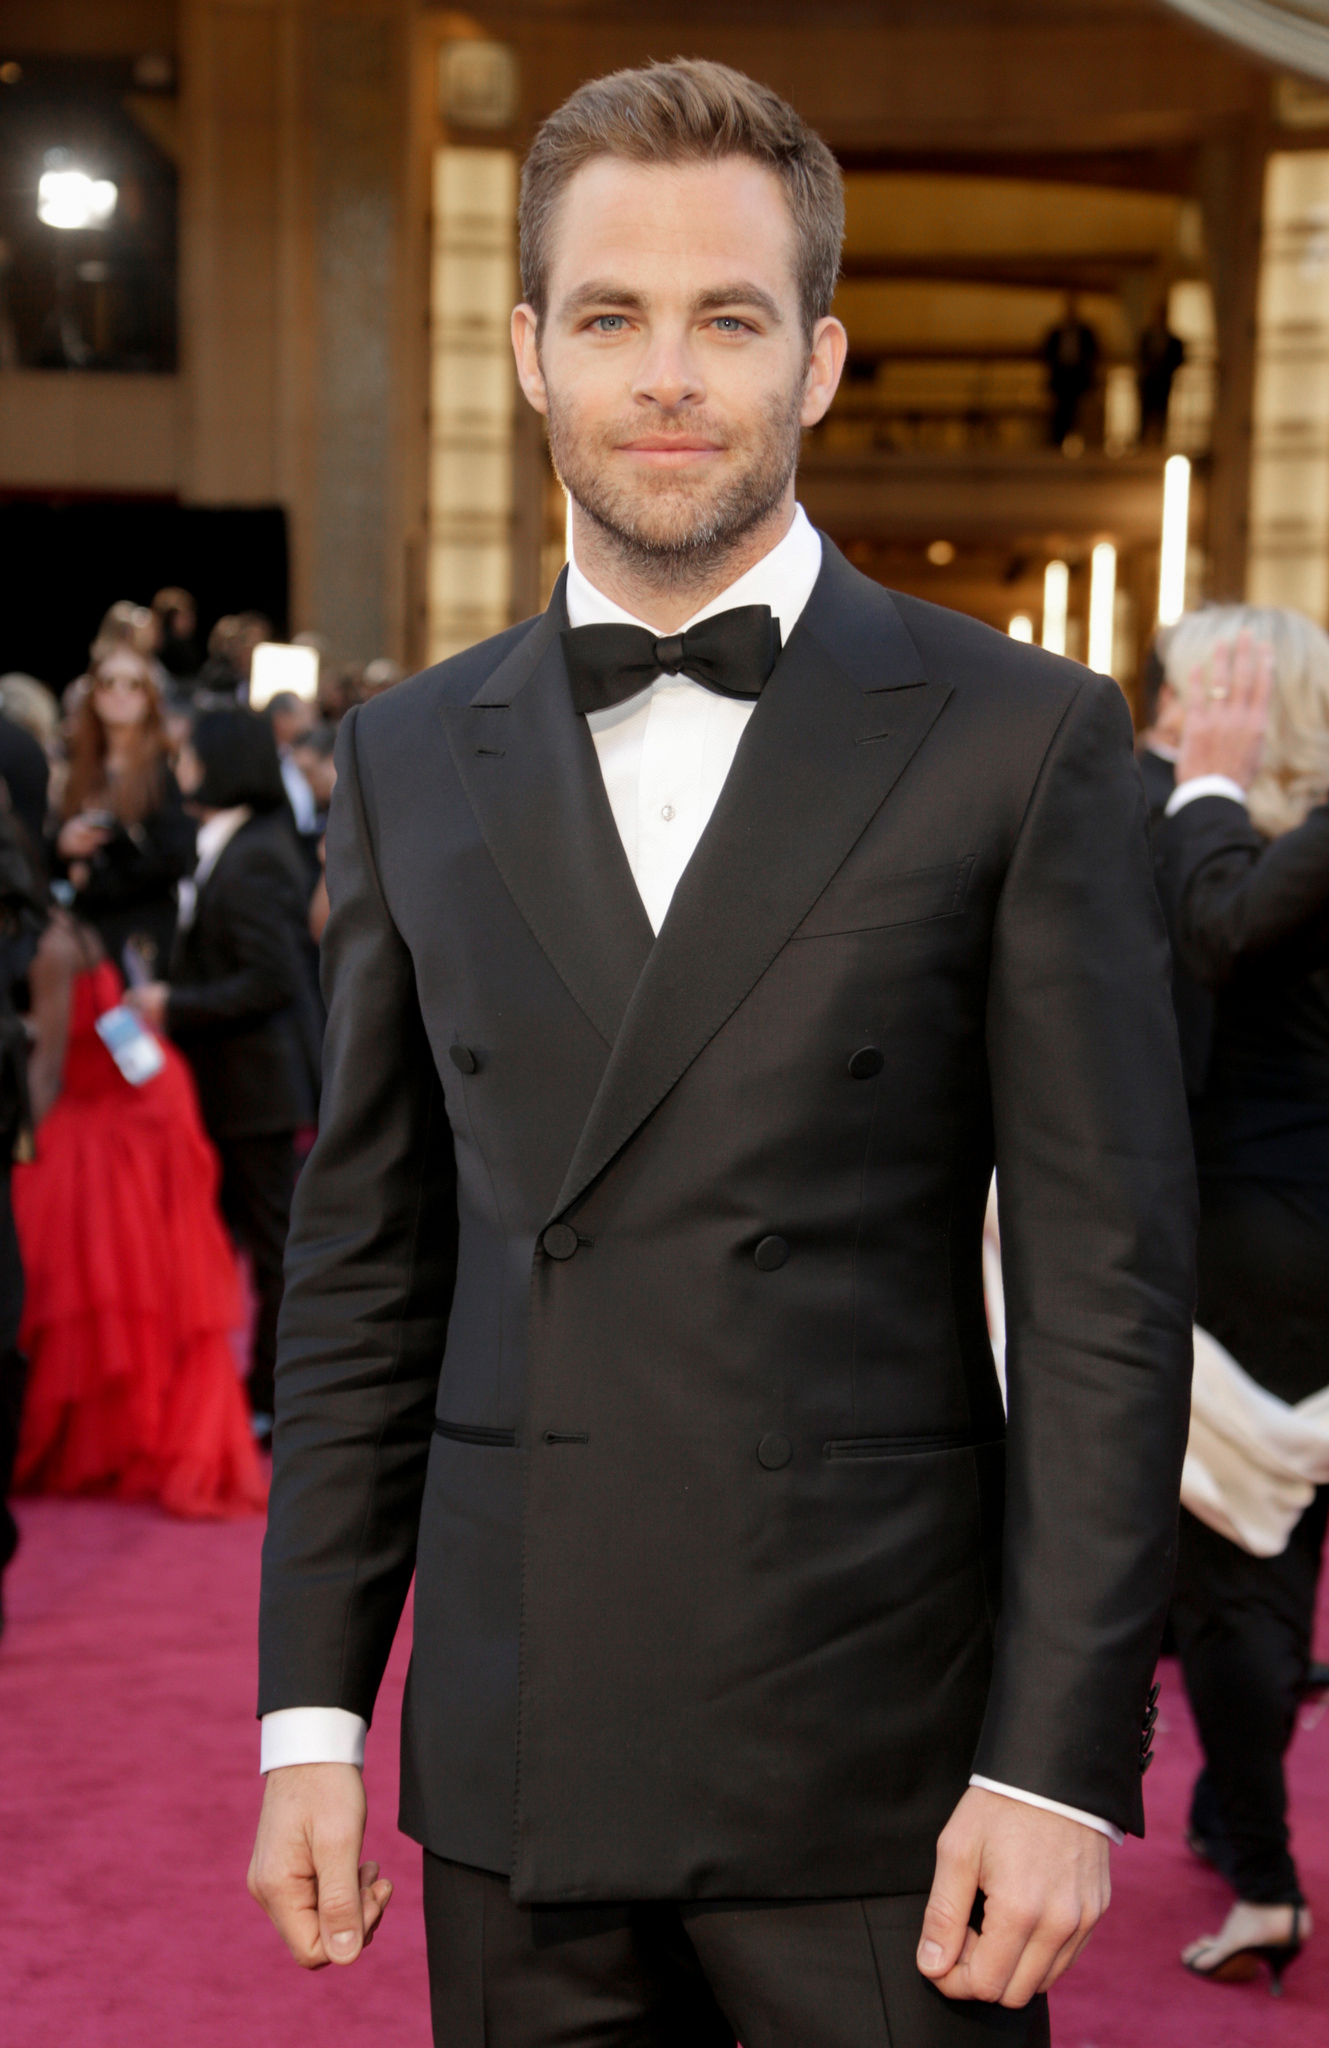 wearing double-breasted black tuxedo with a black bow tie